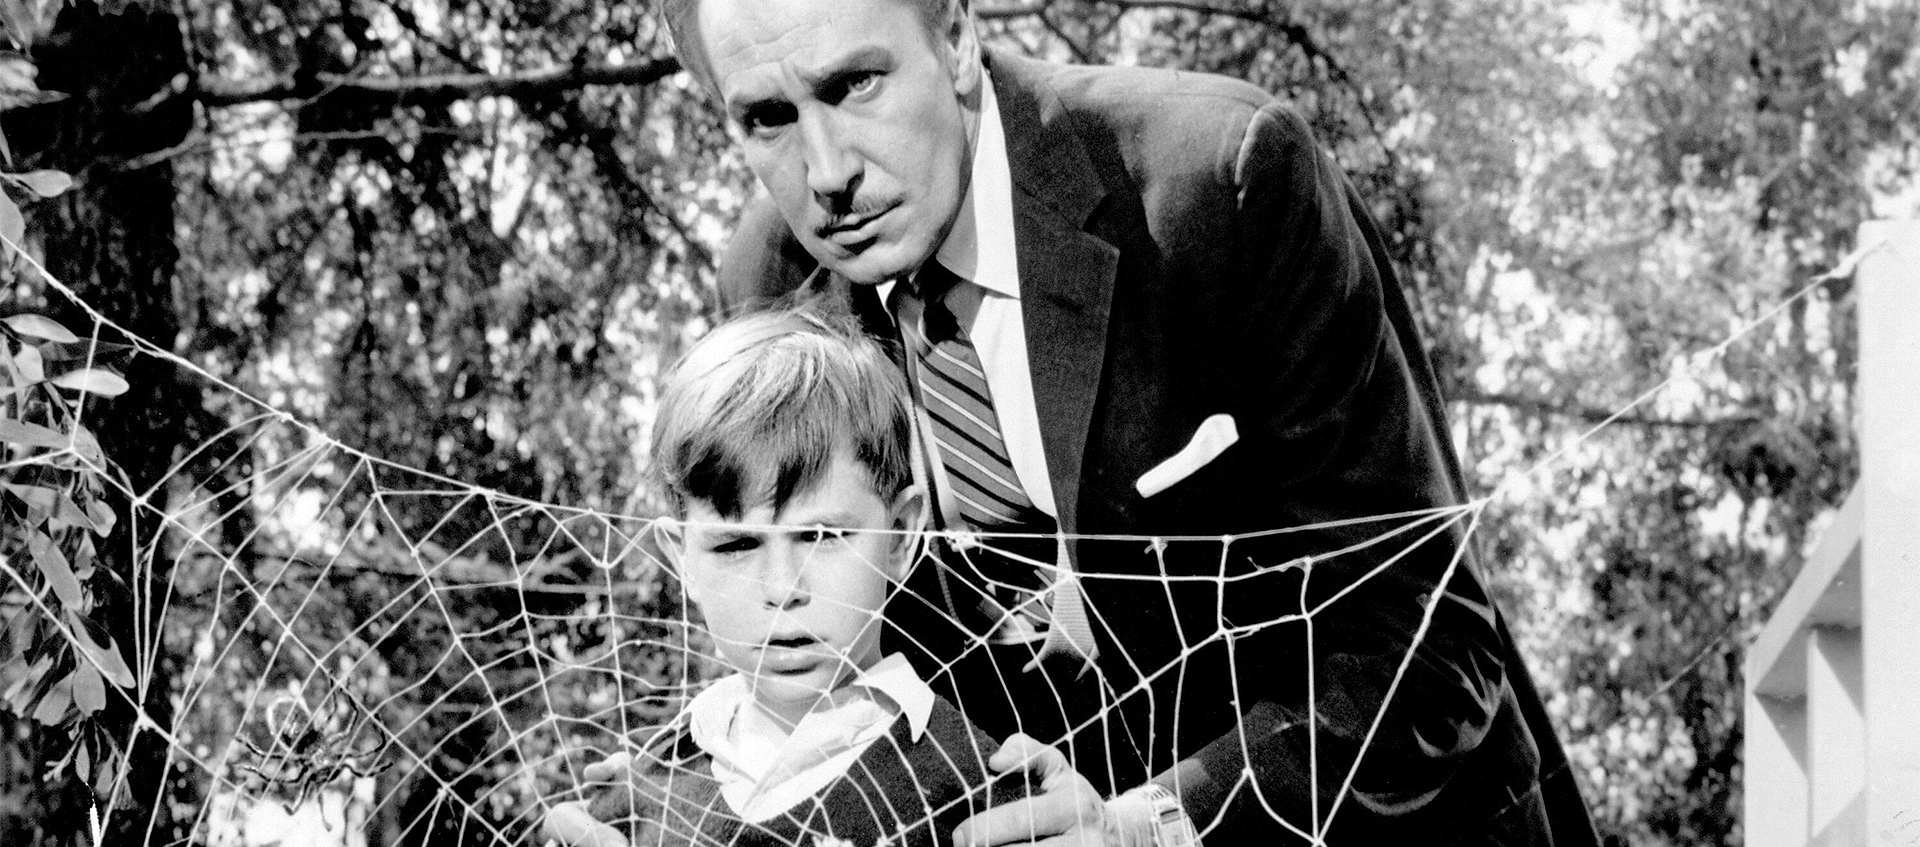 Boy and man in front of a spider web